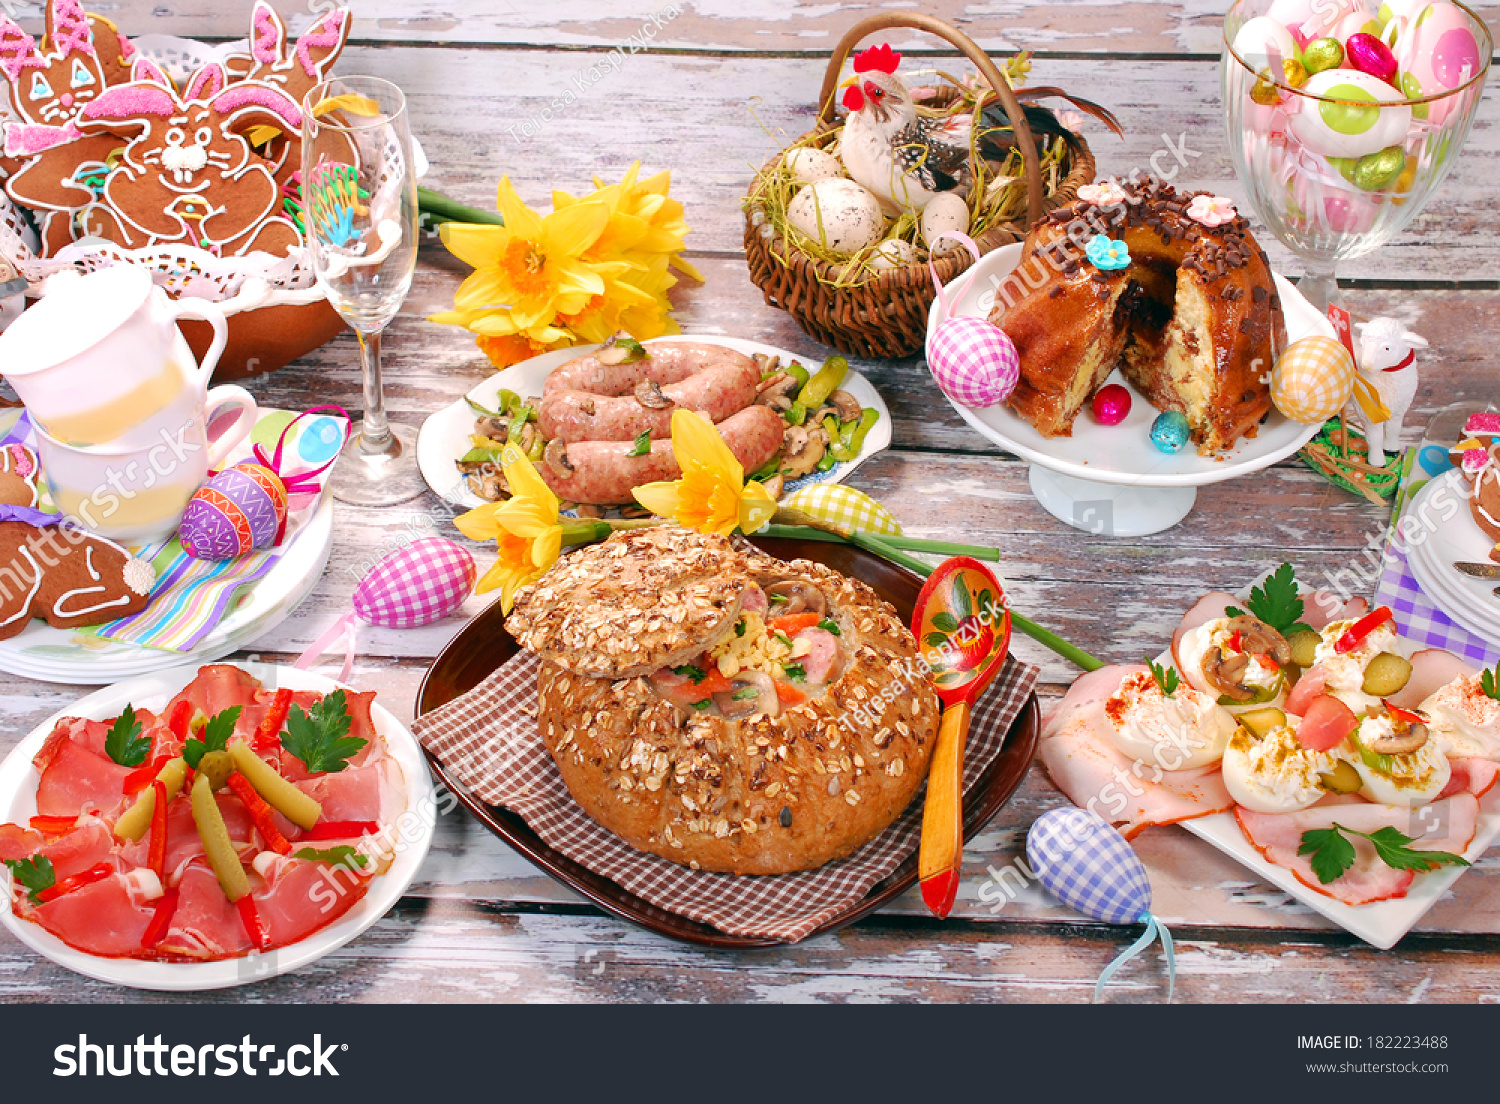 Traditional Polish Dishes Easter Dinner White Stock Photo Edit Now 182223488